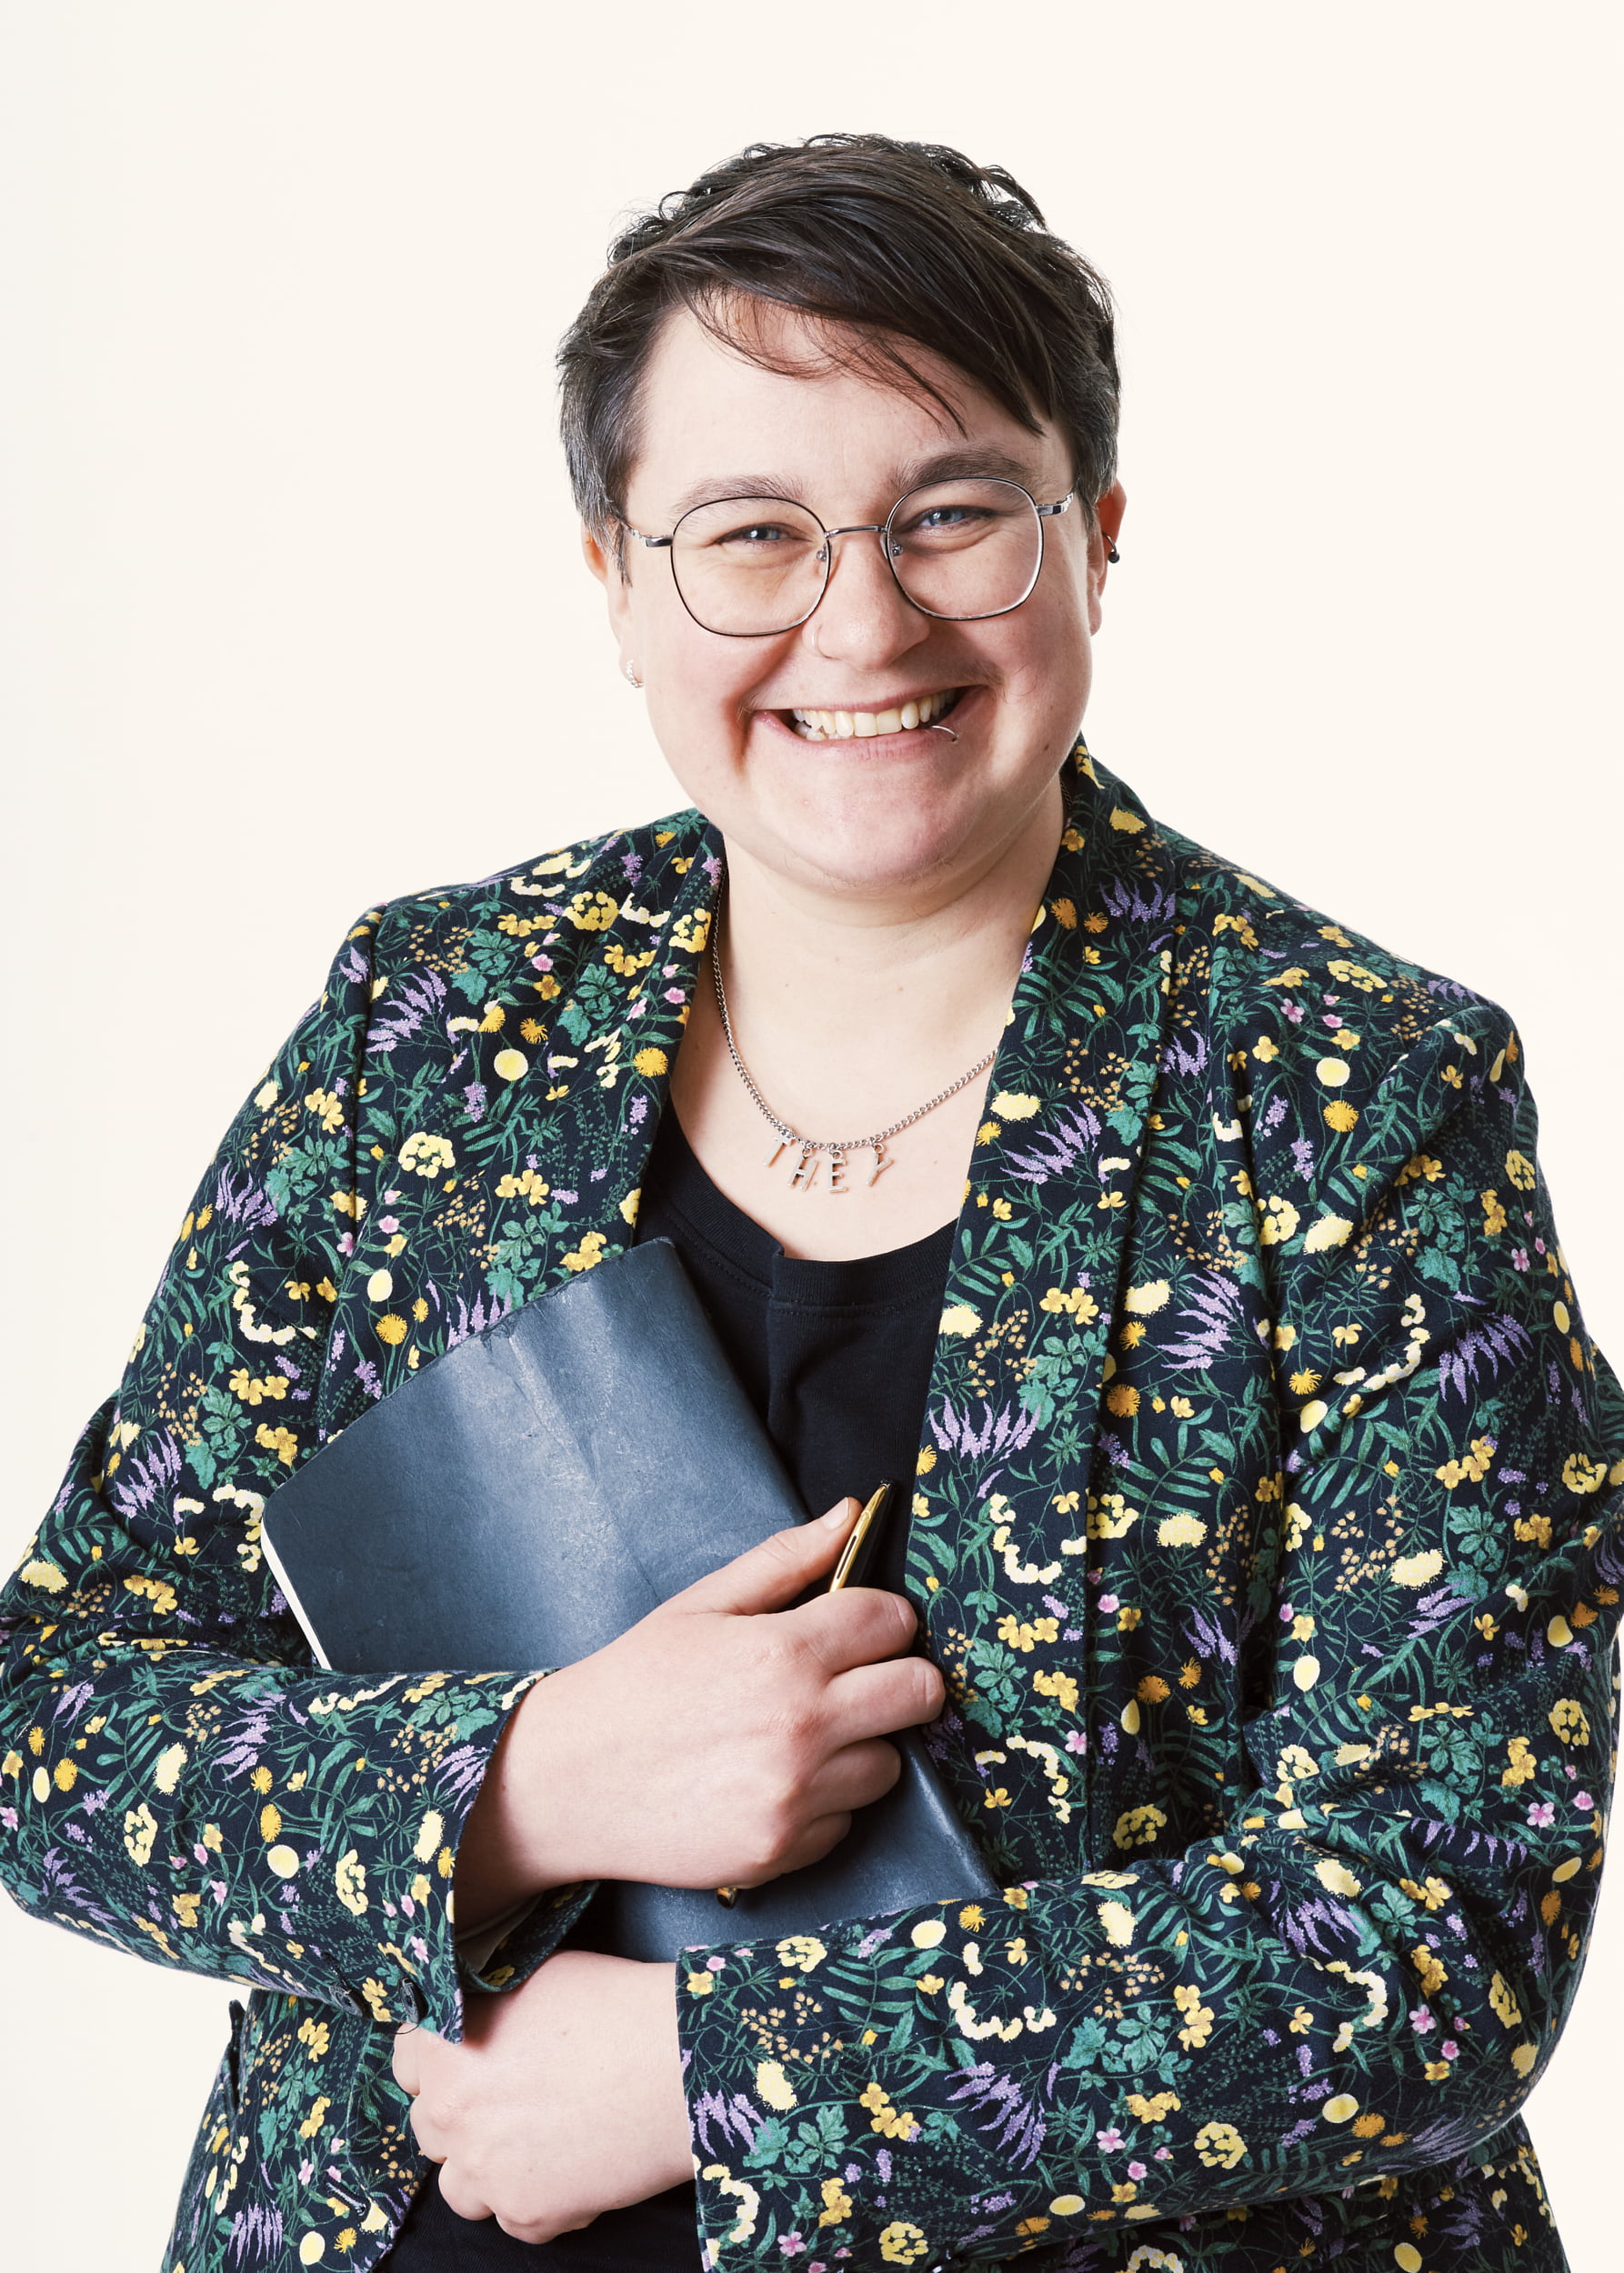 Lindon smiles, holding a leather bound book. Short hair, round glasses and wearing a patterned colourful blazer and black t-shirt